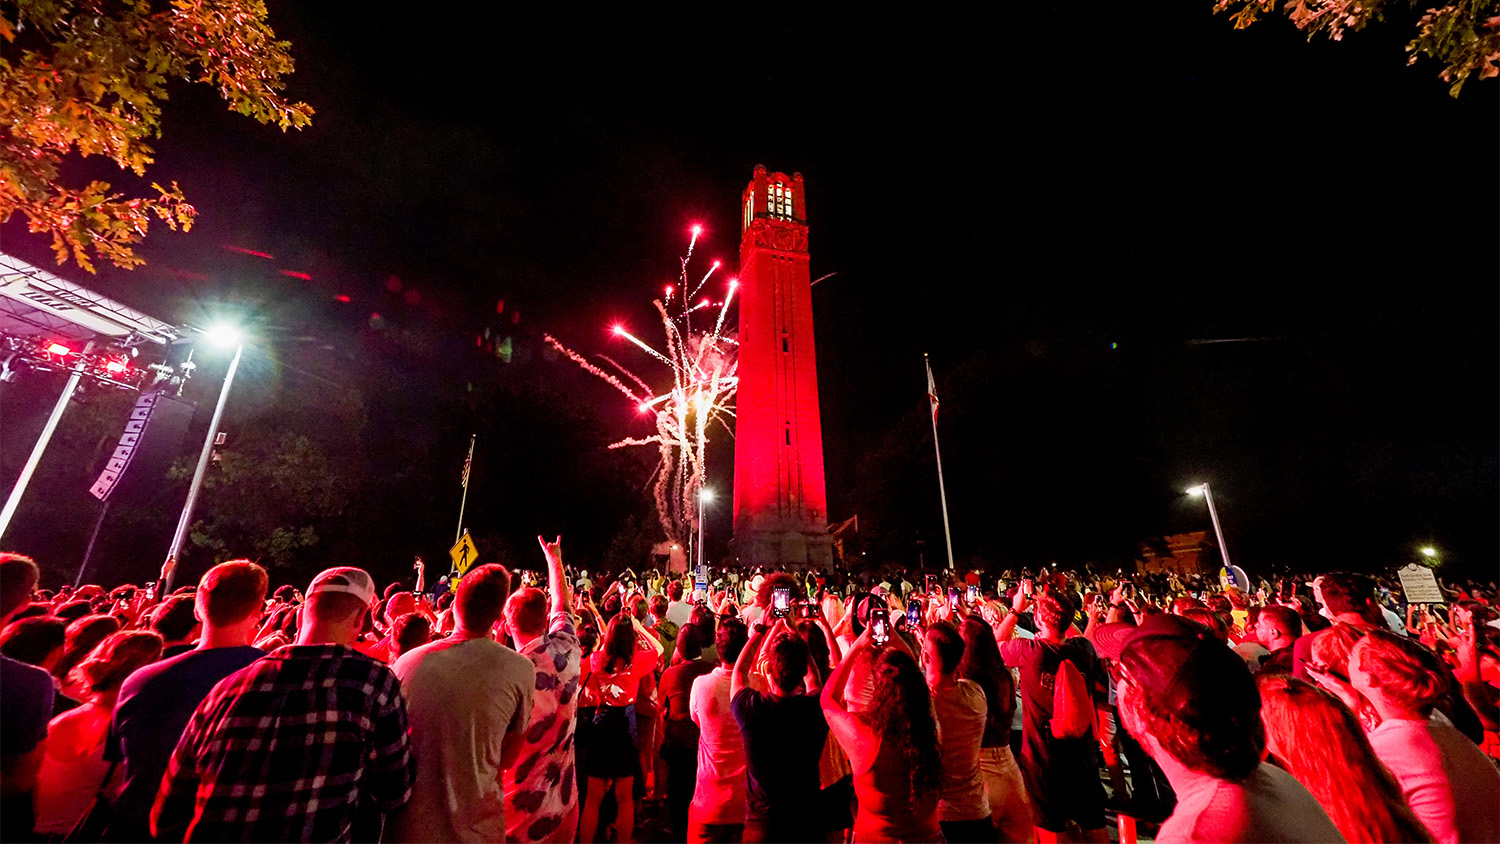 Belltower lit in red at night with fireworks in background and cheering crowd in foreground.